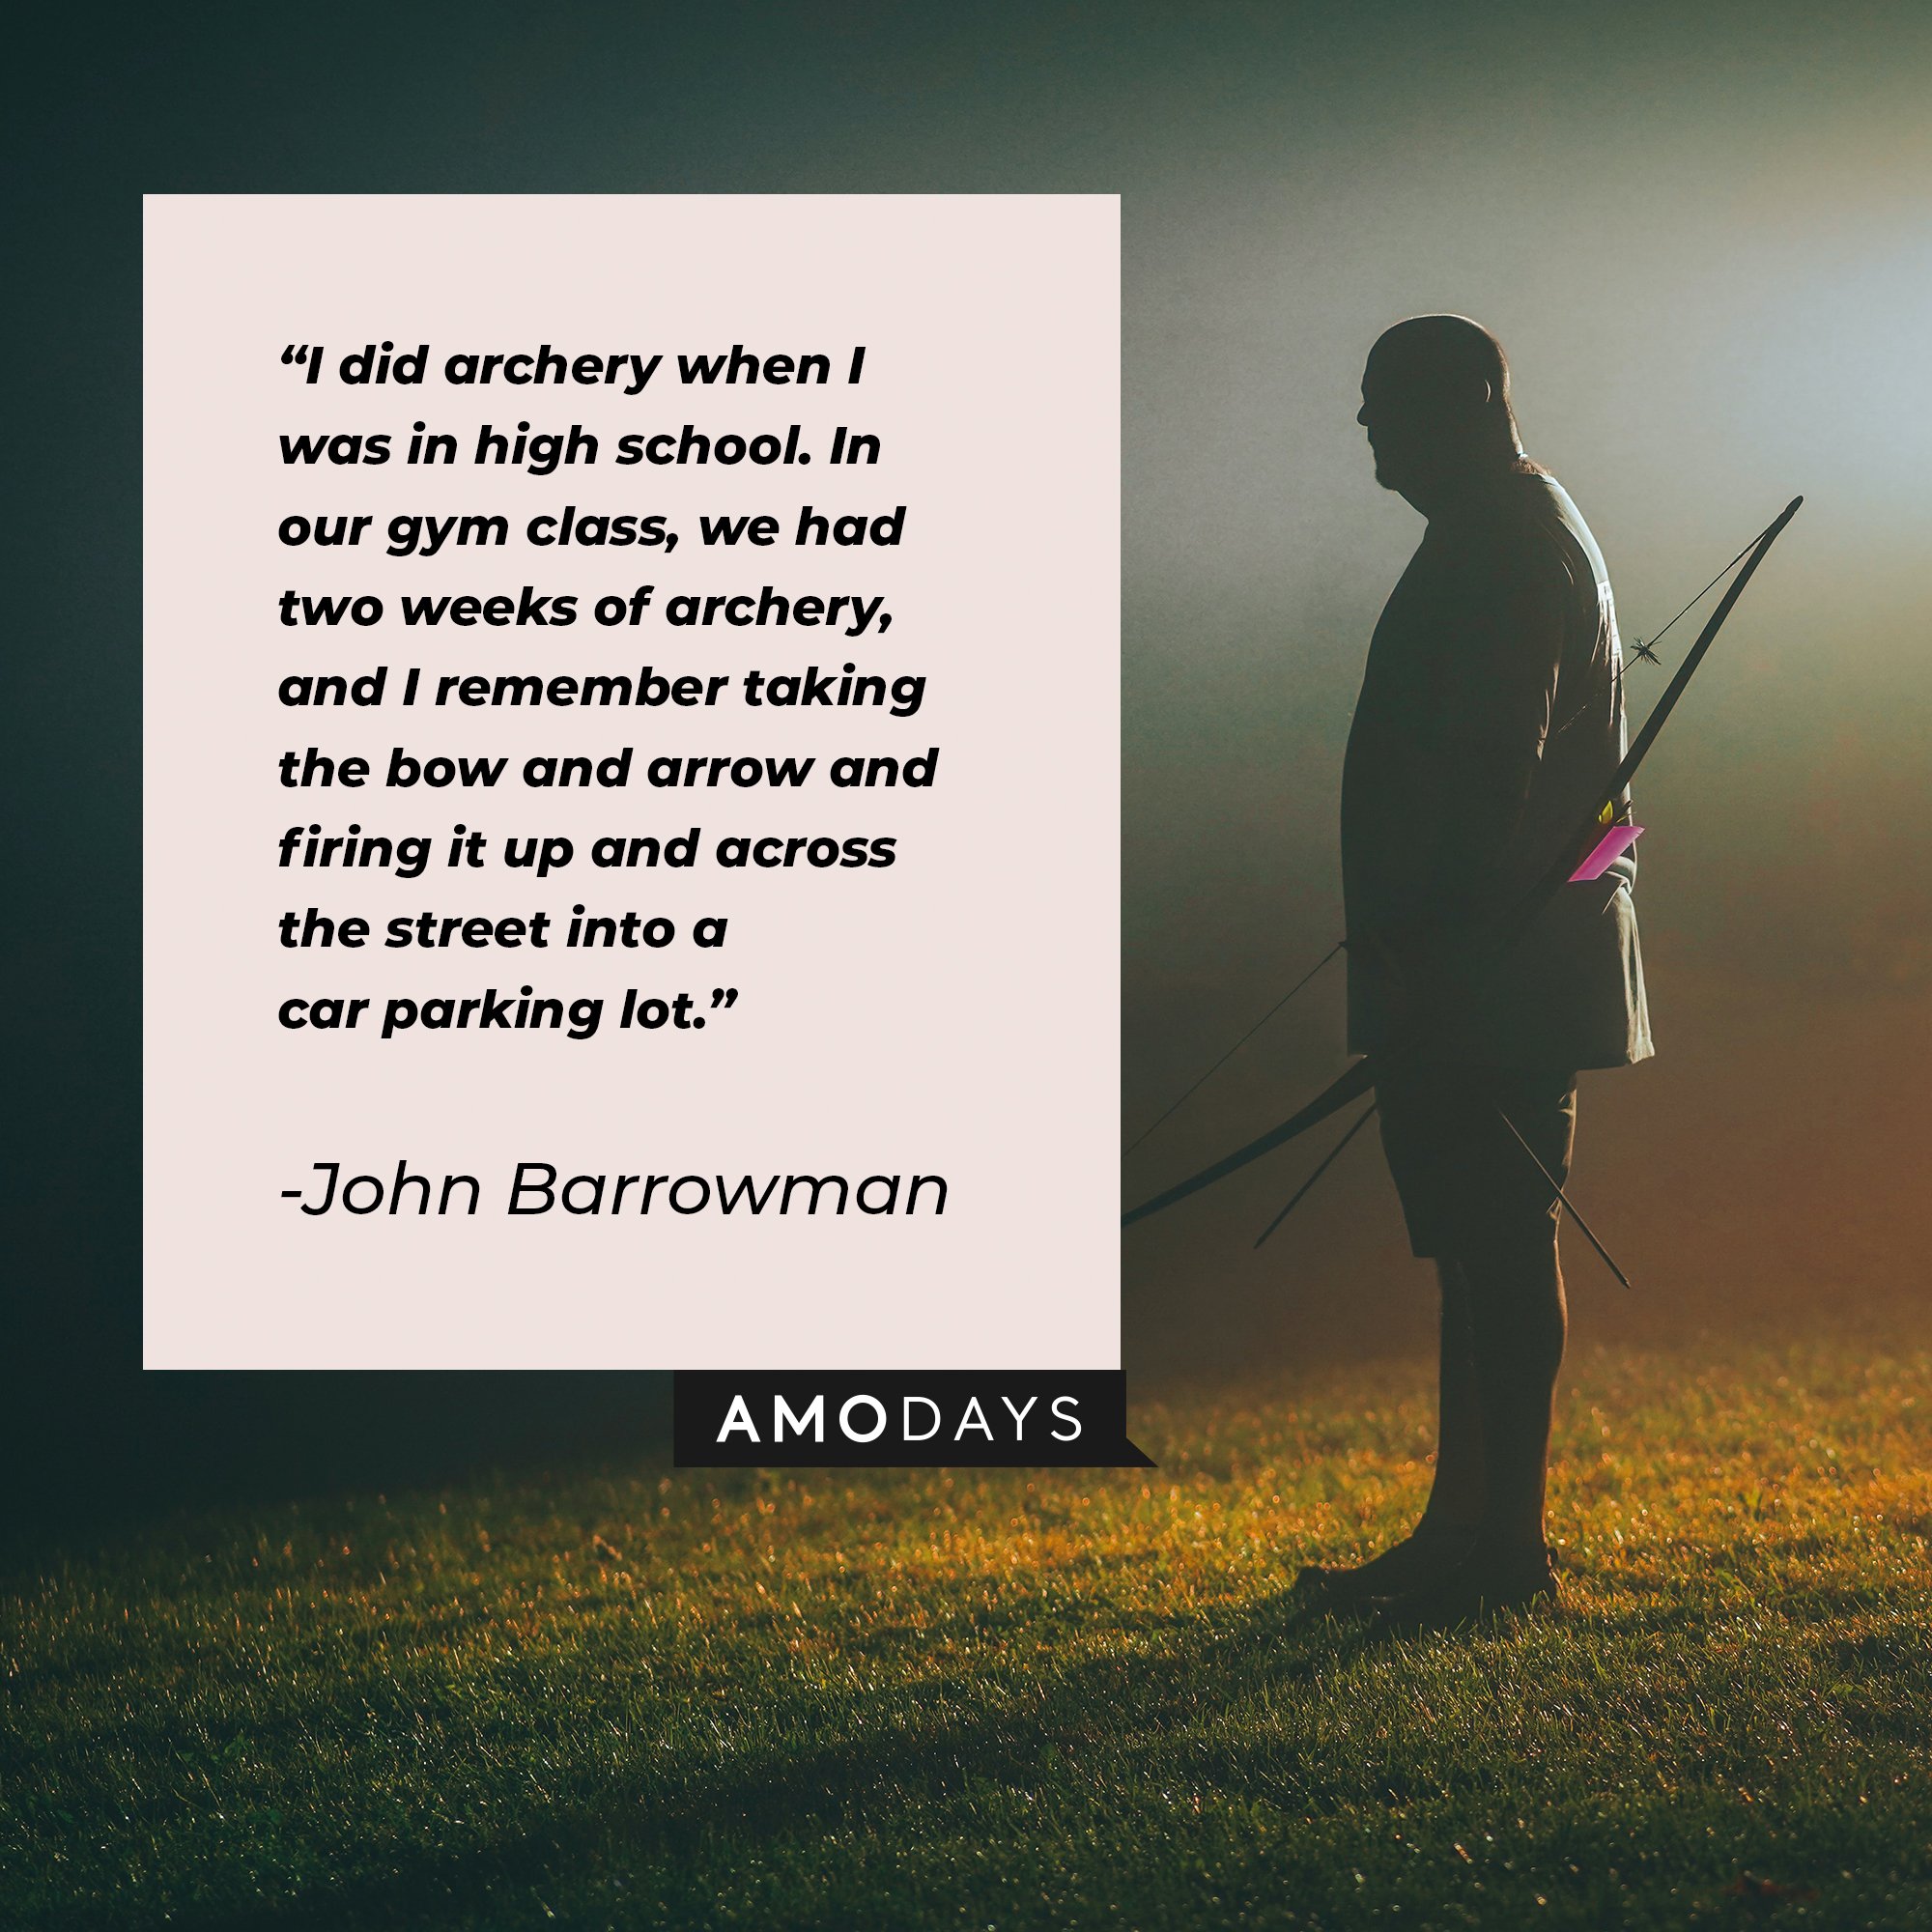 John Barrowman’s quote: "I did archery when I was in high school. In our gym class, we had two weeks of archery, and I remember taking the bow and arrow and firing it up and across the street into a car parking lot." | Image: AmoDays